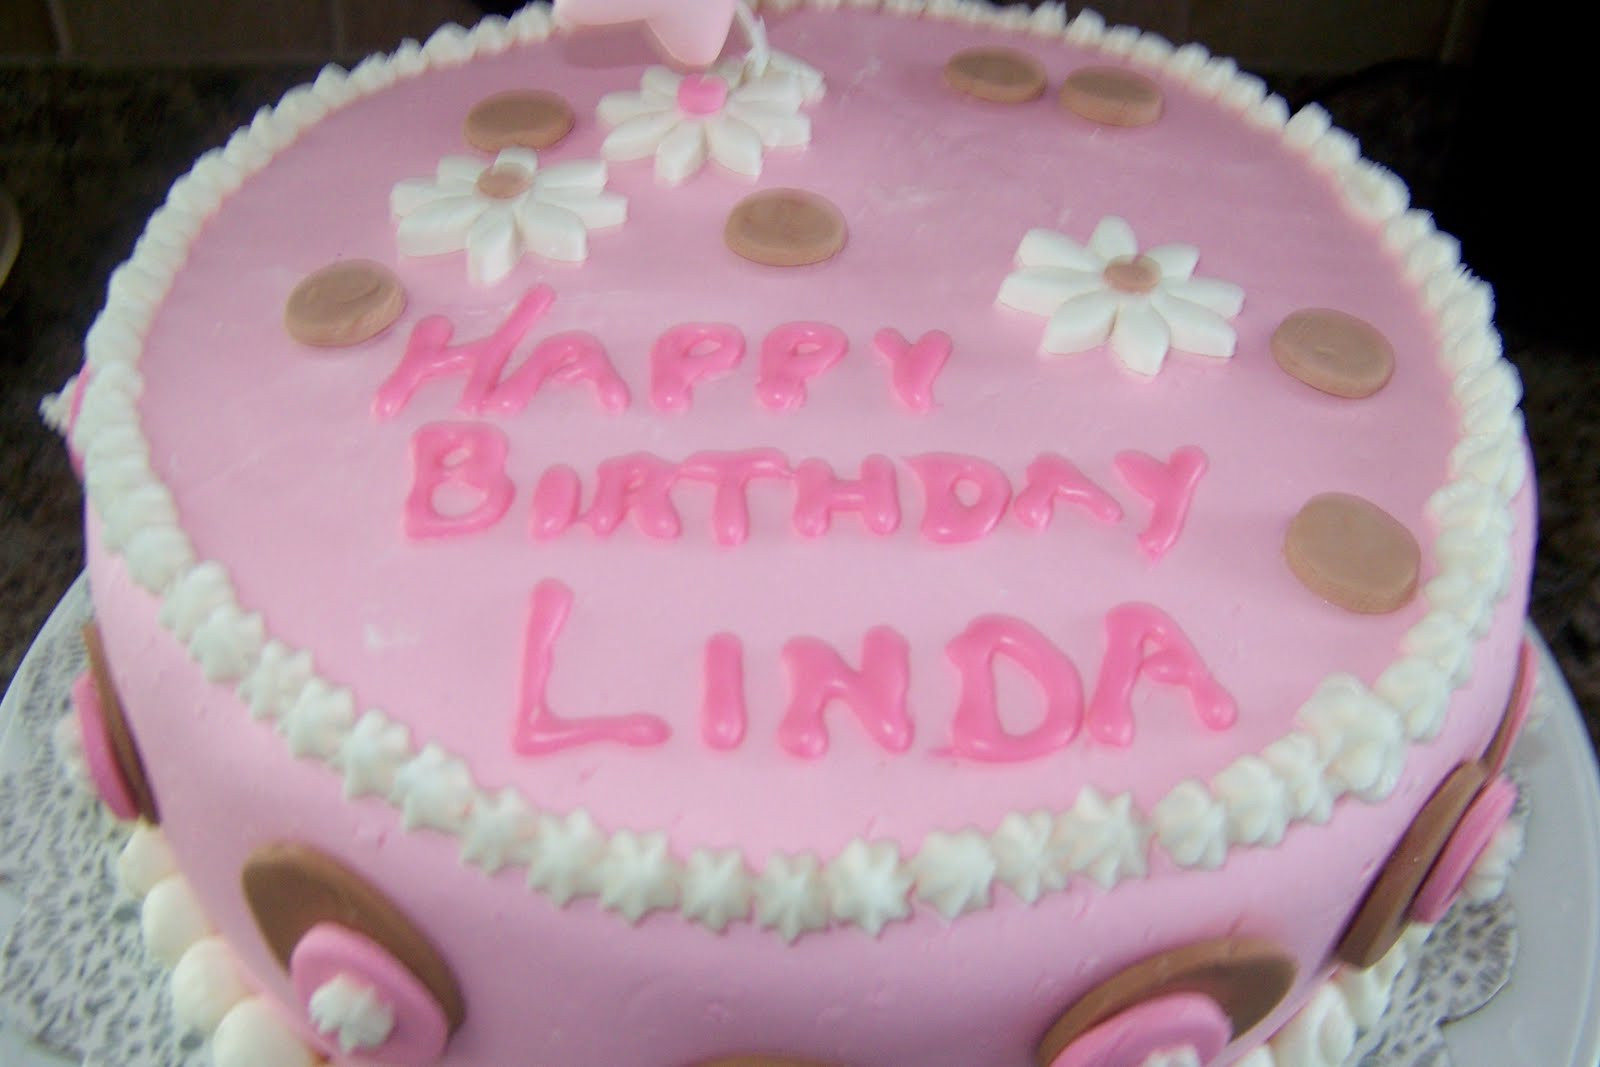 Happy Birthday Linda Cake
 katykakes CAKES AND DESSERTS by MOI AND THE